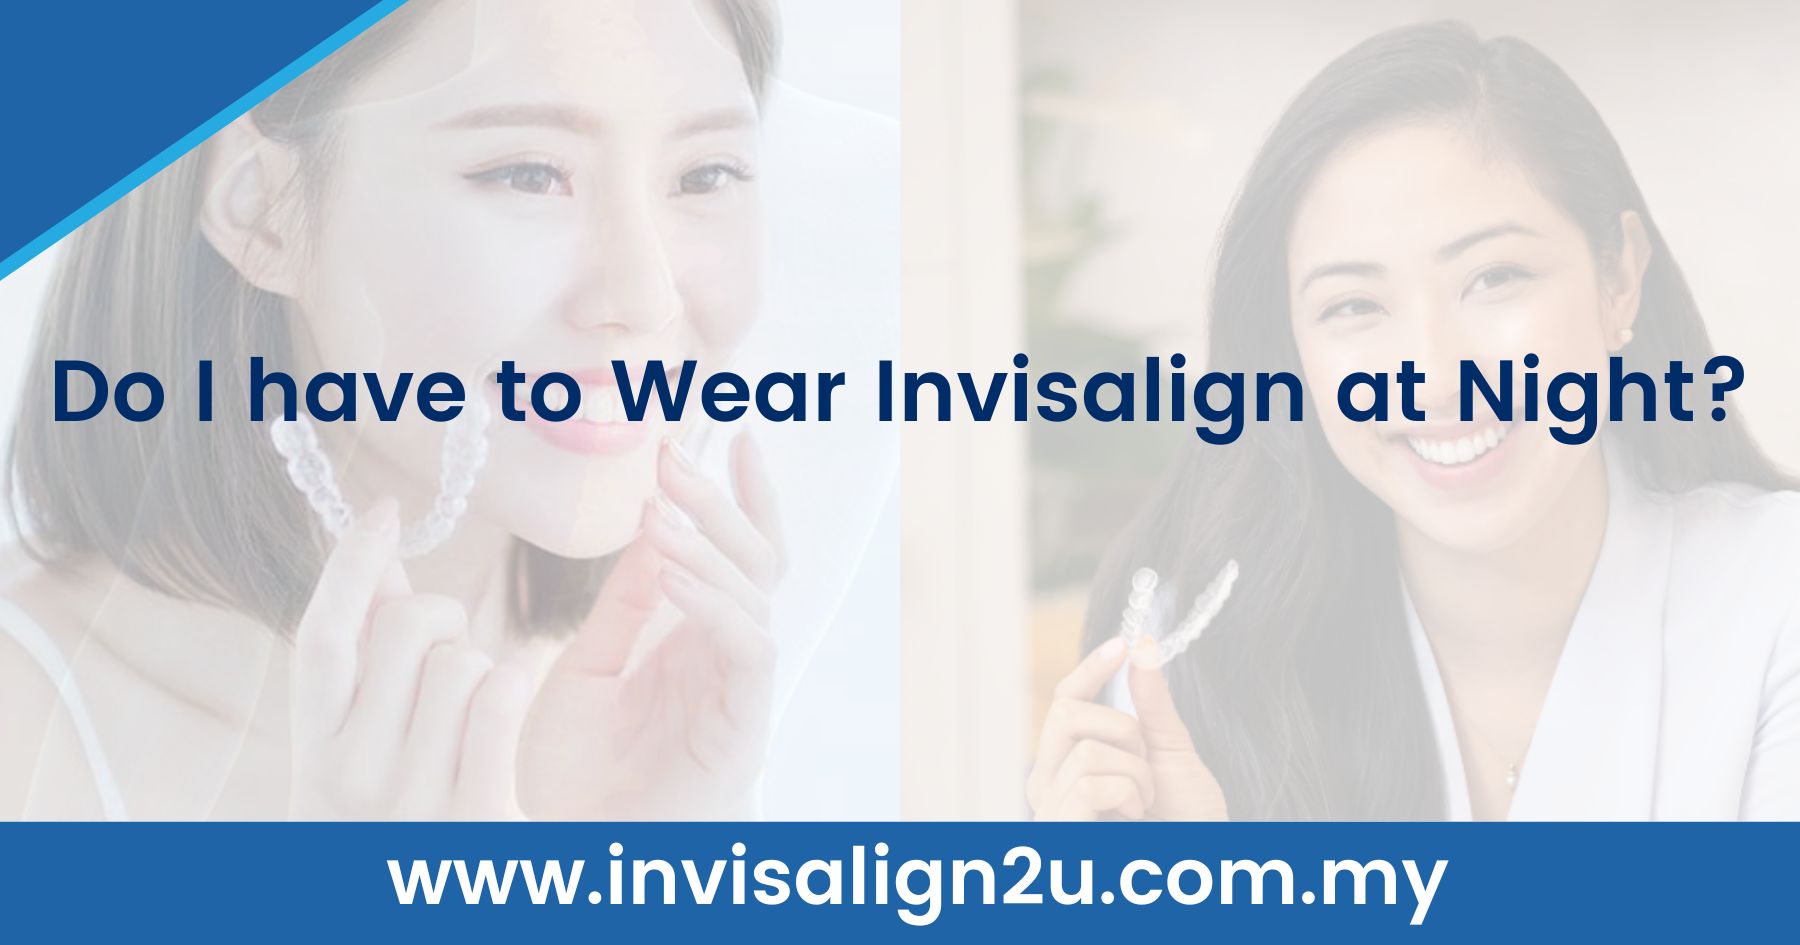 Do I have to Wear Invisalign at Night?